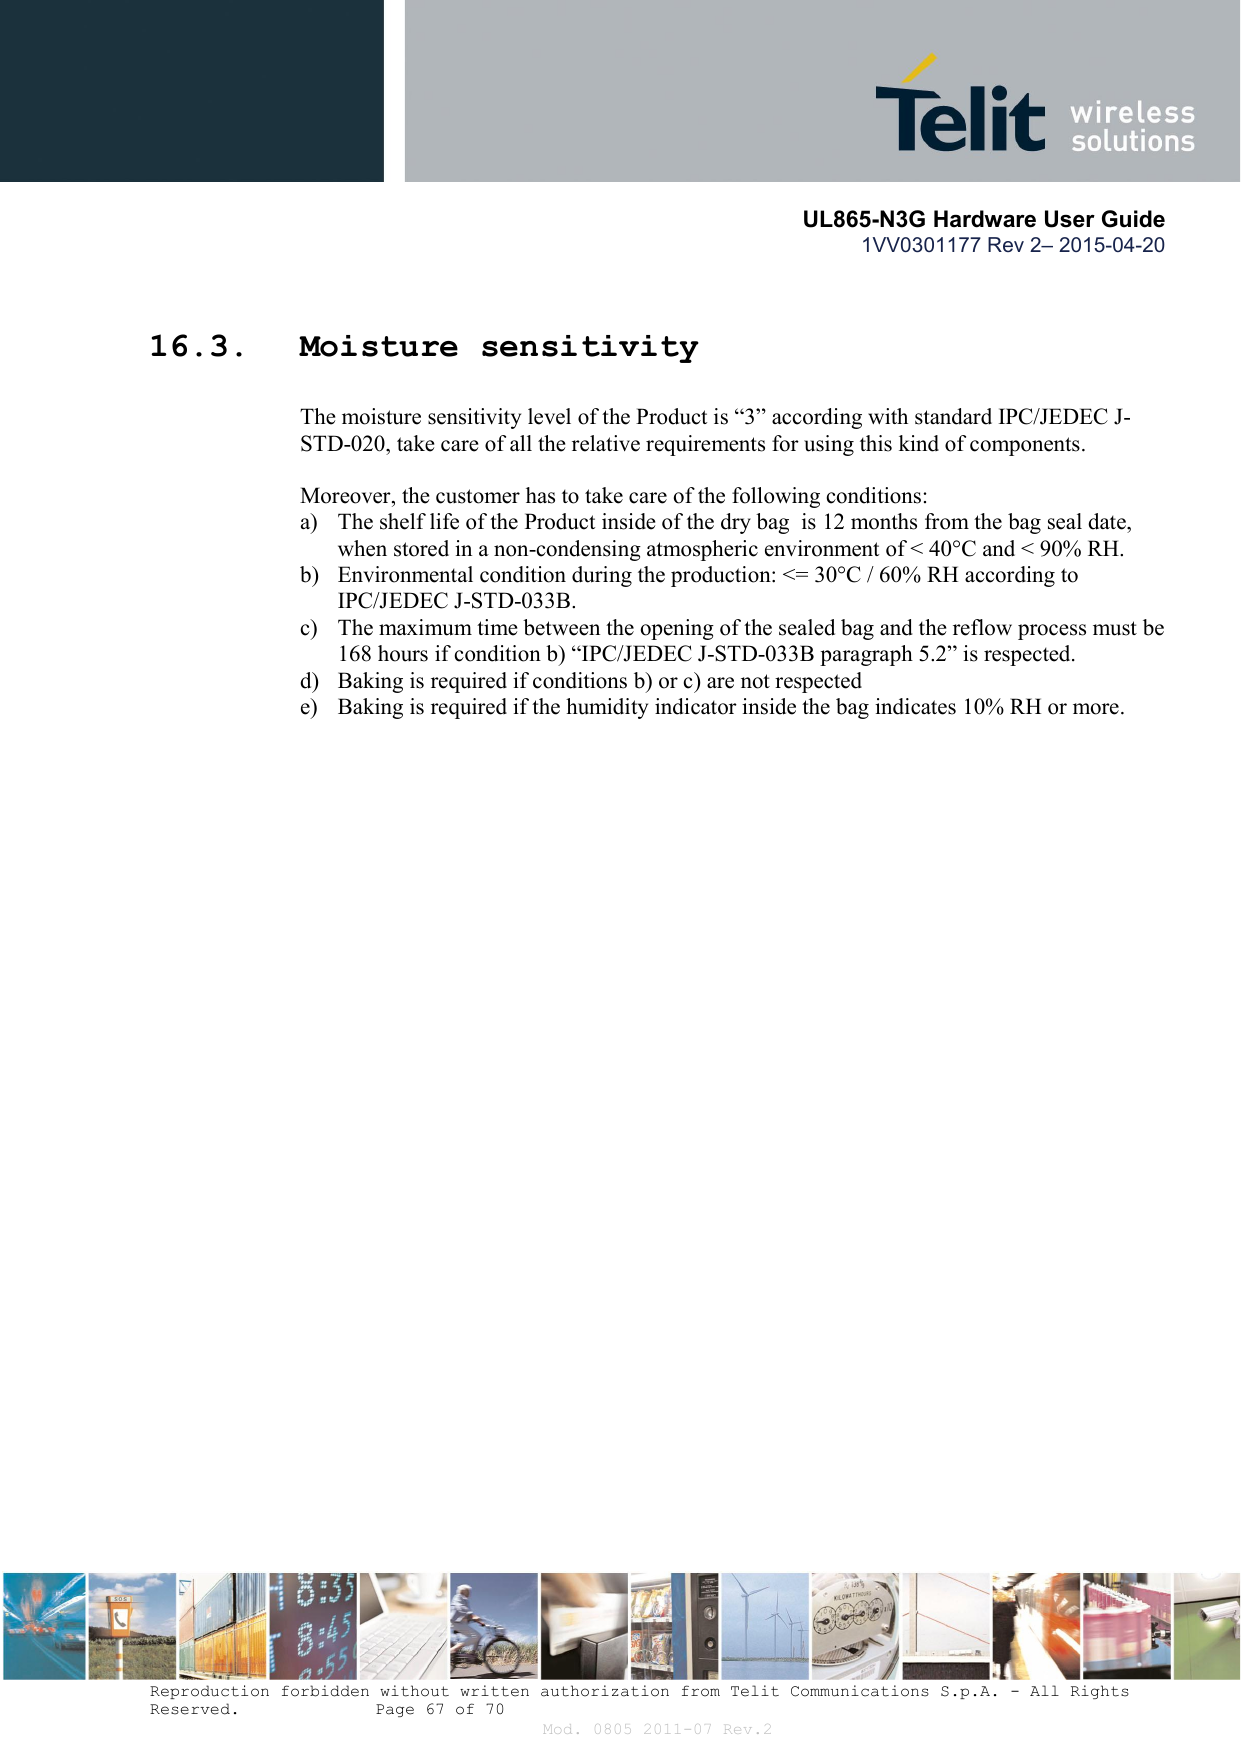       UL865-N3G Hardware User Guide 1VV0301177 Rev 2– 2015-04-20  Reproduction forbidden without written authorization from Telit Communications S.p.A. - All Rights Reserved.    Page 67 of 70 Mod. 0805 2011-07 Rev.2 16.3. Moisture sensitivity The moisture sensitivity level of the Product is “3” according with standard IPC/JEDEC J-STD-020, take care of all the relative requirements for using this kind of components.  Moreover, the customer has to take care of the following conditions: a) The shelf life of the Product inside of the dry bag  is 12 months from the bag seal date,    when stored in a non-condensing atmospheric environment of &lt; 40°C and &lt; 90% RH. b) Environmental condition during the production: &lt;= 30°C / 60% RH according to  IPC/JEDEC J-STD-033B. c) The maximum time between the opening of the sealed bag and the reflow process must be  168 hours if condition b) “IPC/JEDEC J-STD-033B paragraph 5.2” is respected. d) Baking is required if conditions b) or c) are not respected e) Baking is required if the humidity indicator inside the bag indicates 10% RH or more.  